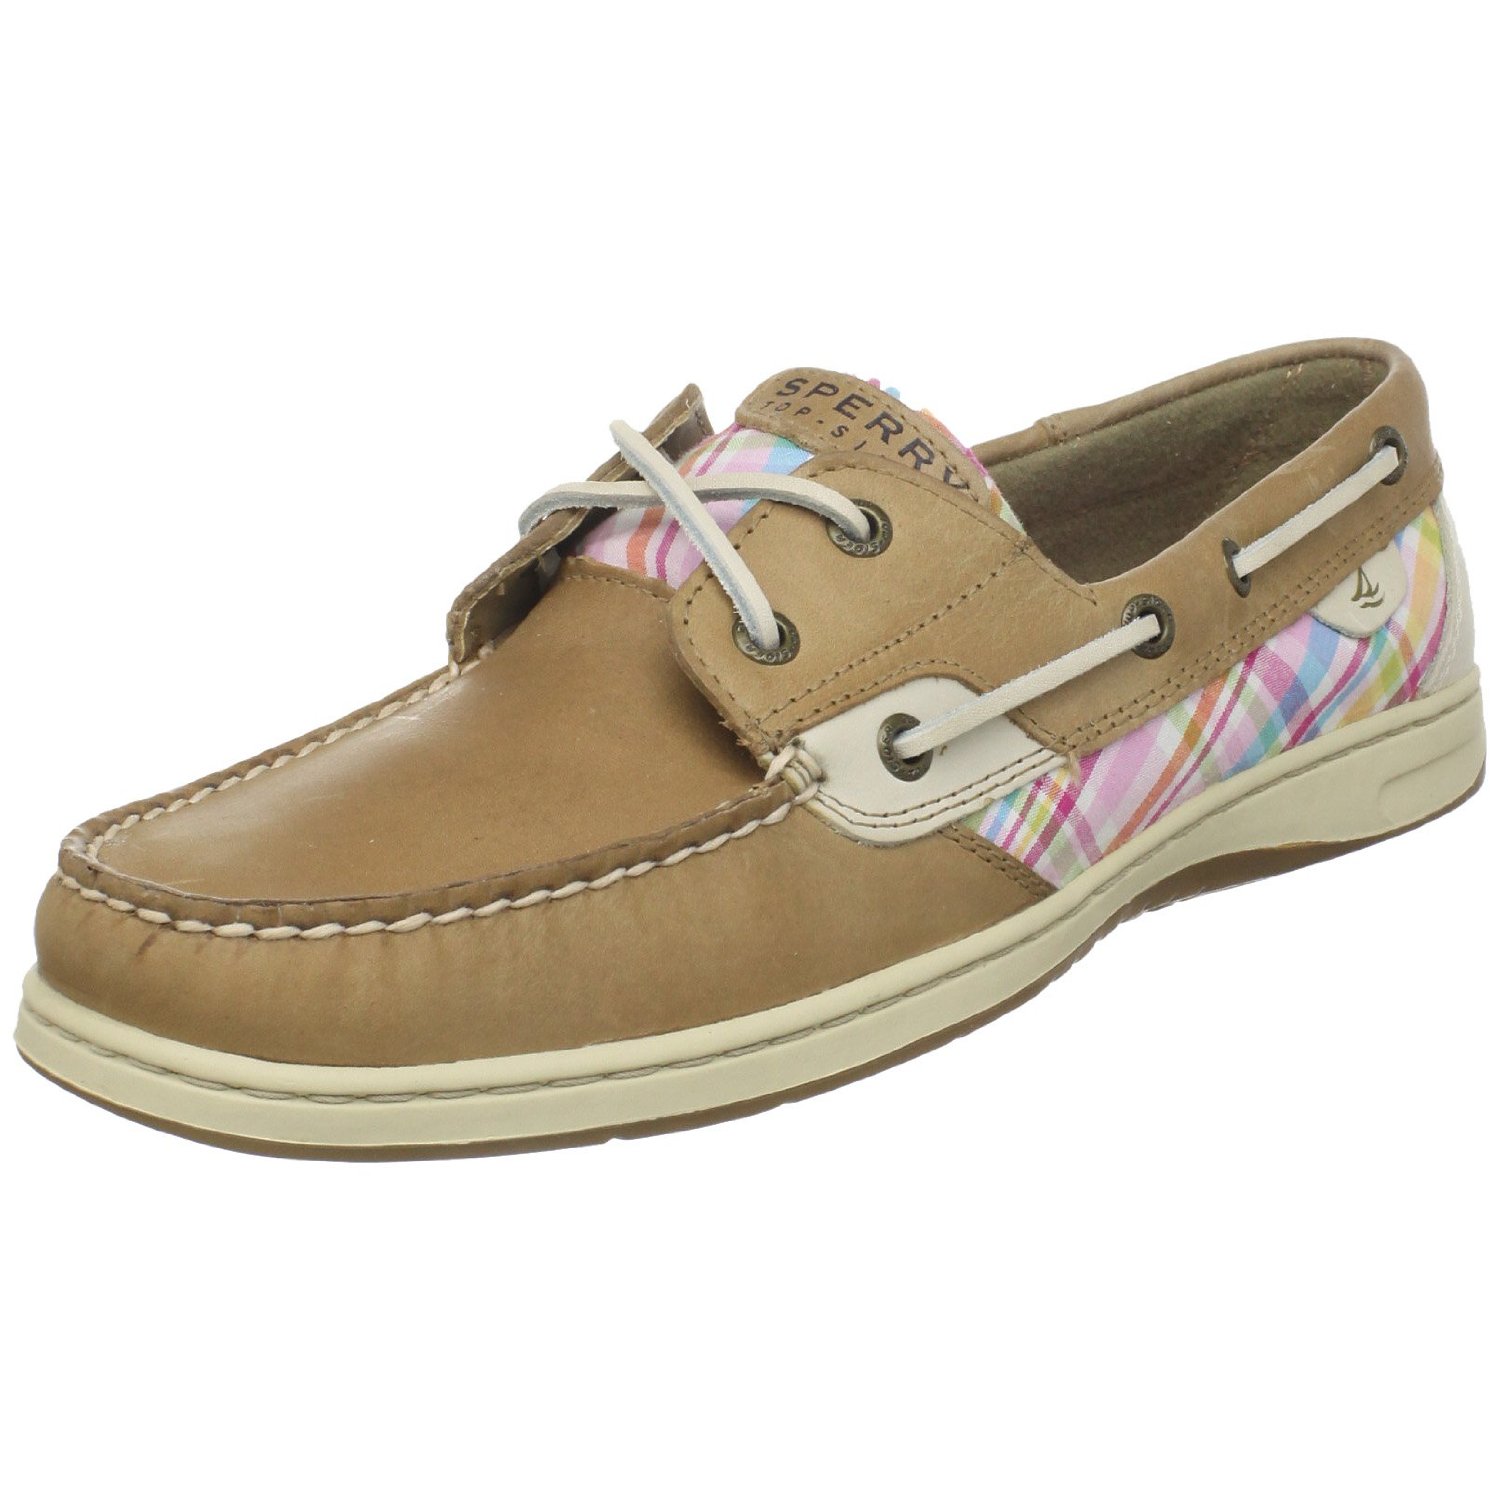 Sperry Top-sider Sperry Top-sider Womens Bluefish Boat Shoe in Beige ...